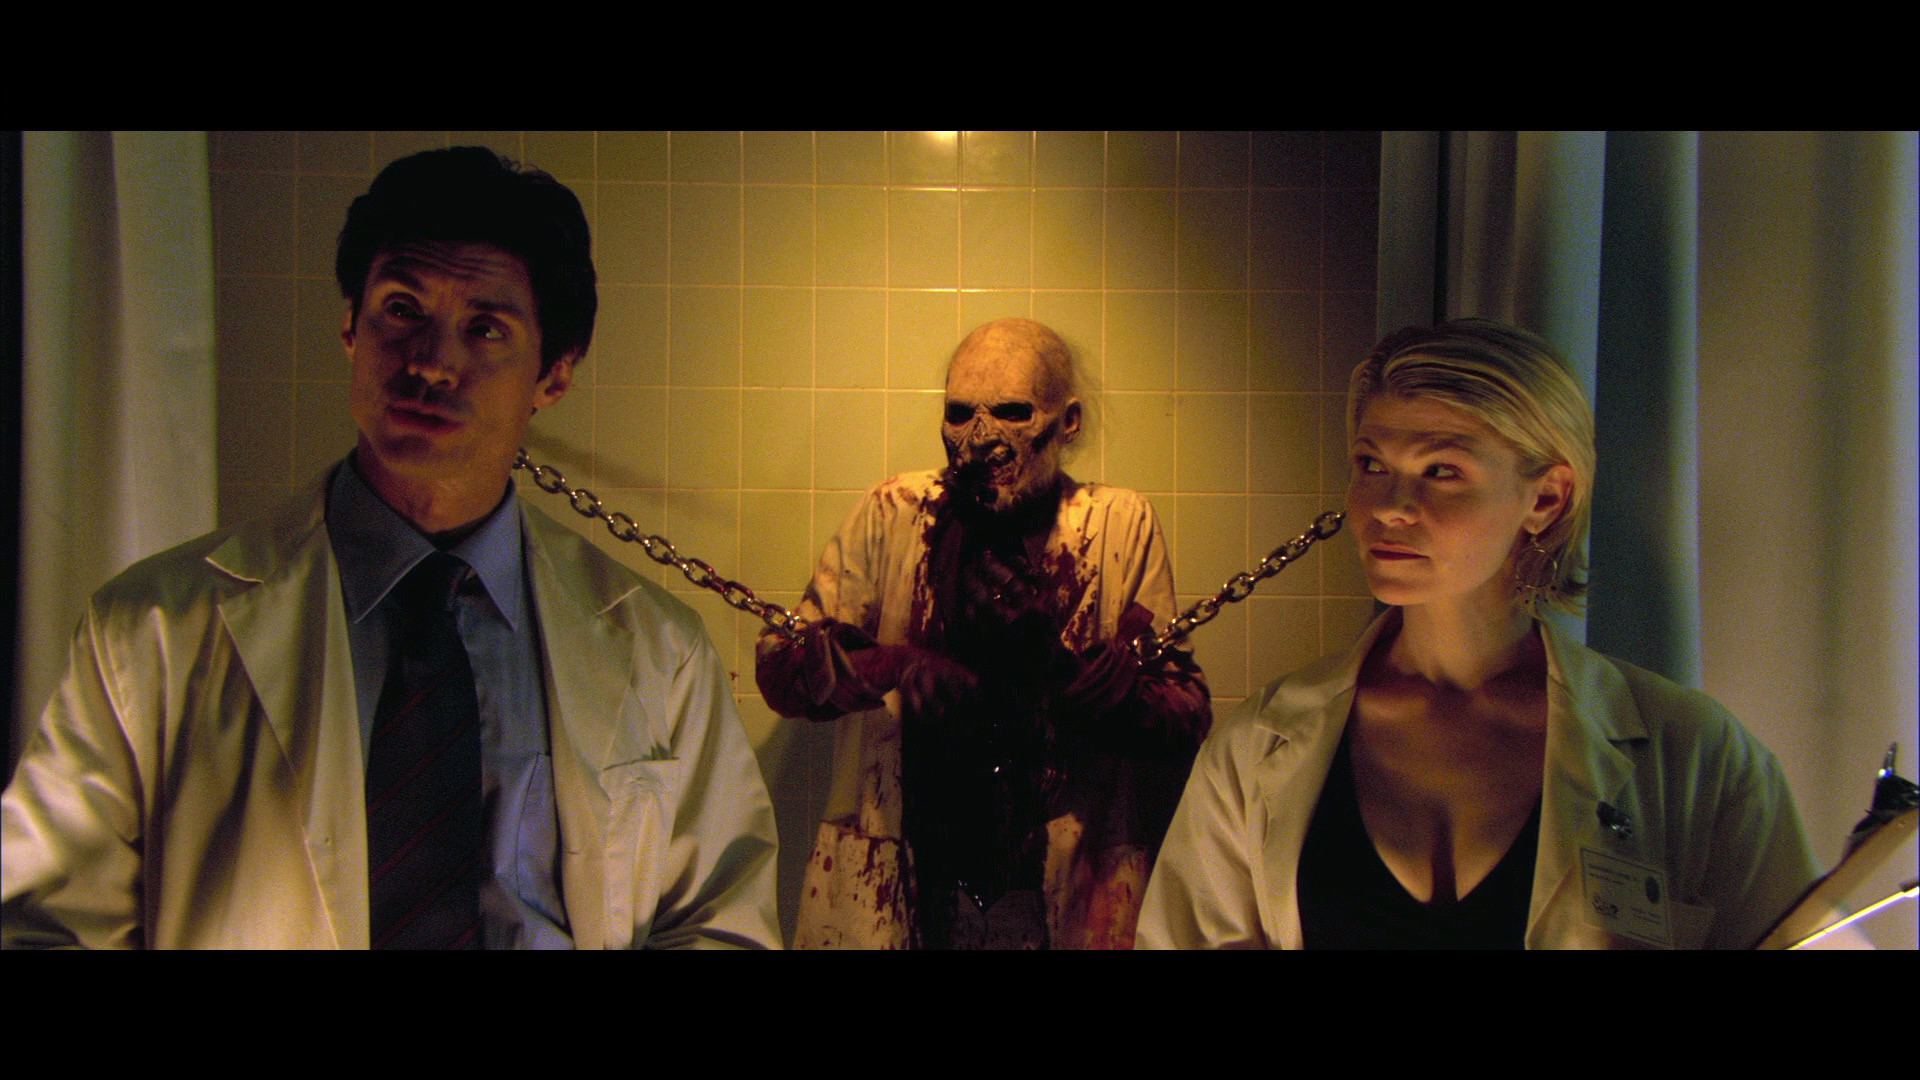 Shannon Malone as Dr. Genet in Zombie Strippers